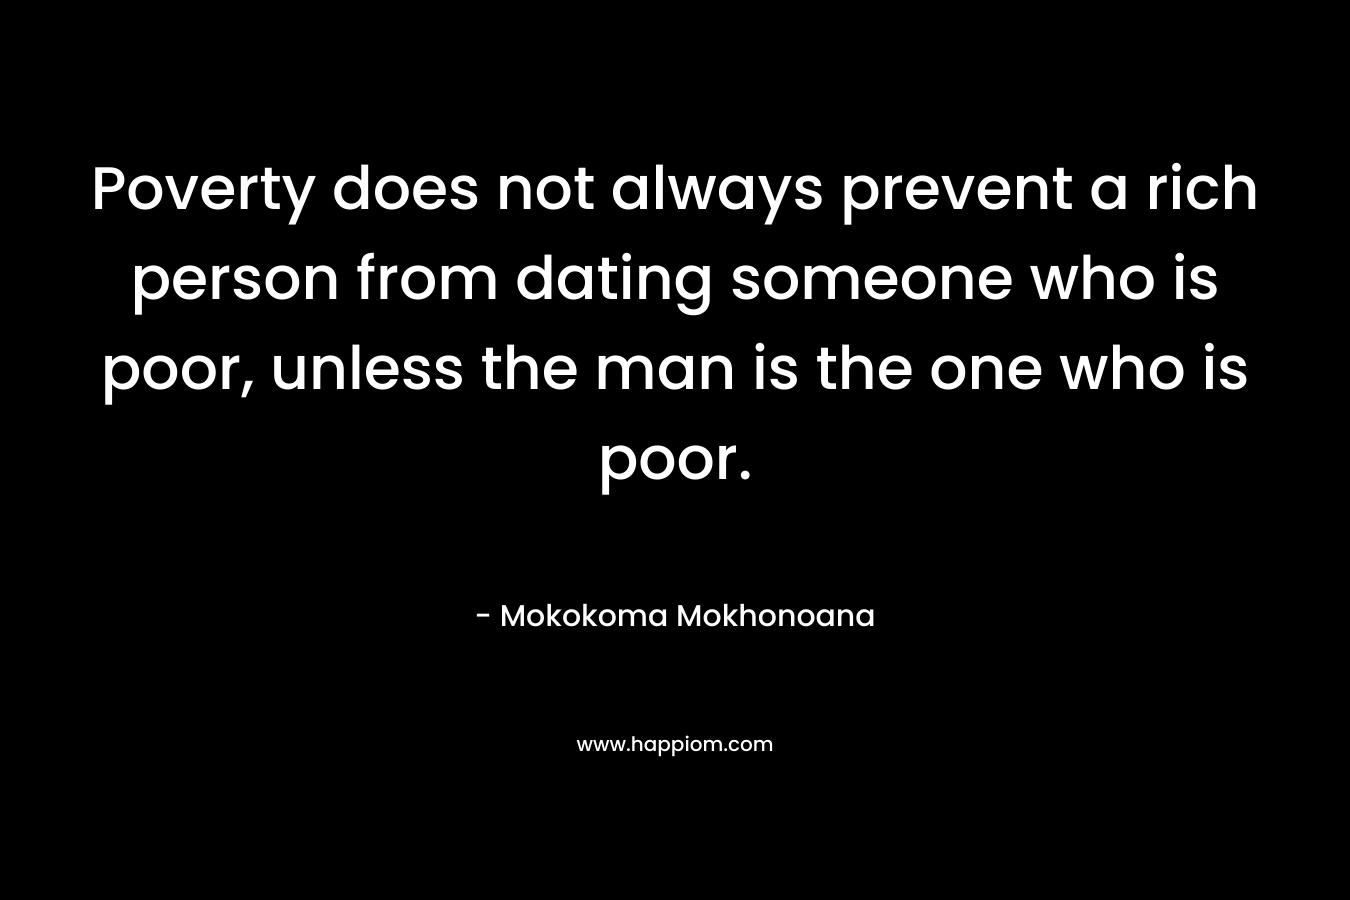 Poverty does not always prevent a rich person from dating someone who is poor, unless the man is the one who is poor.